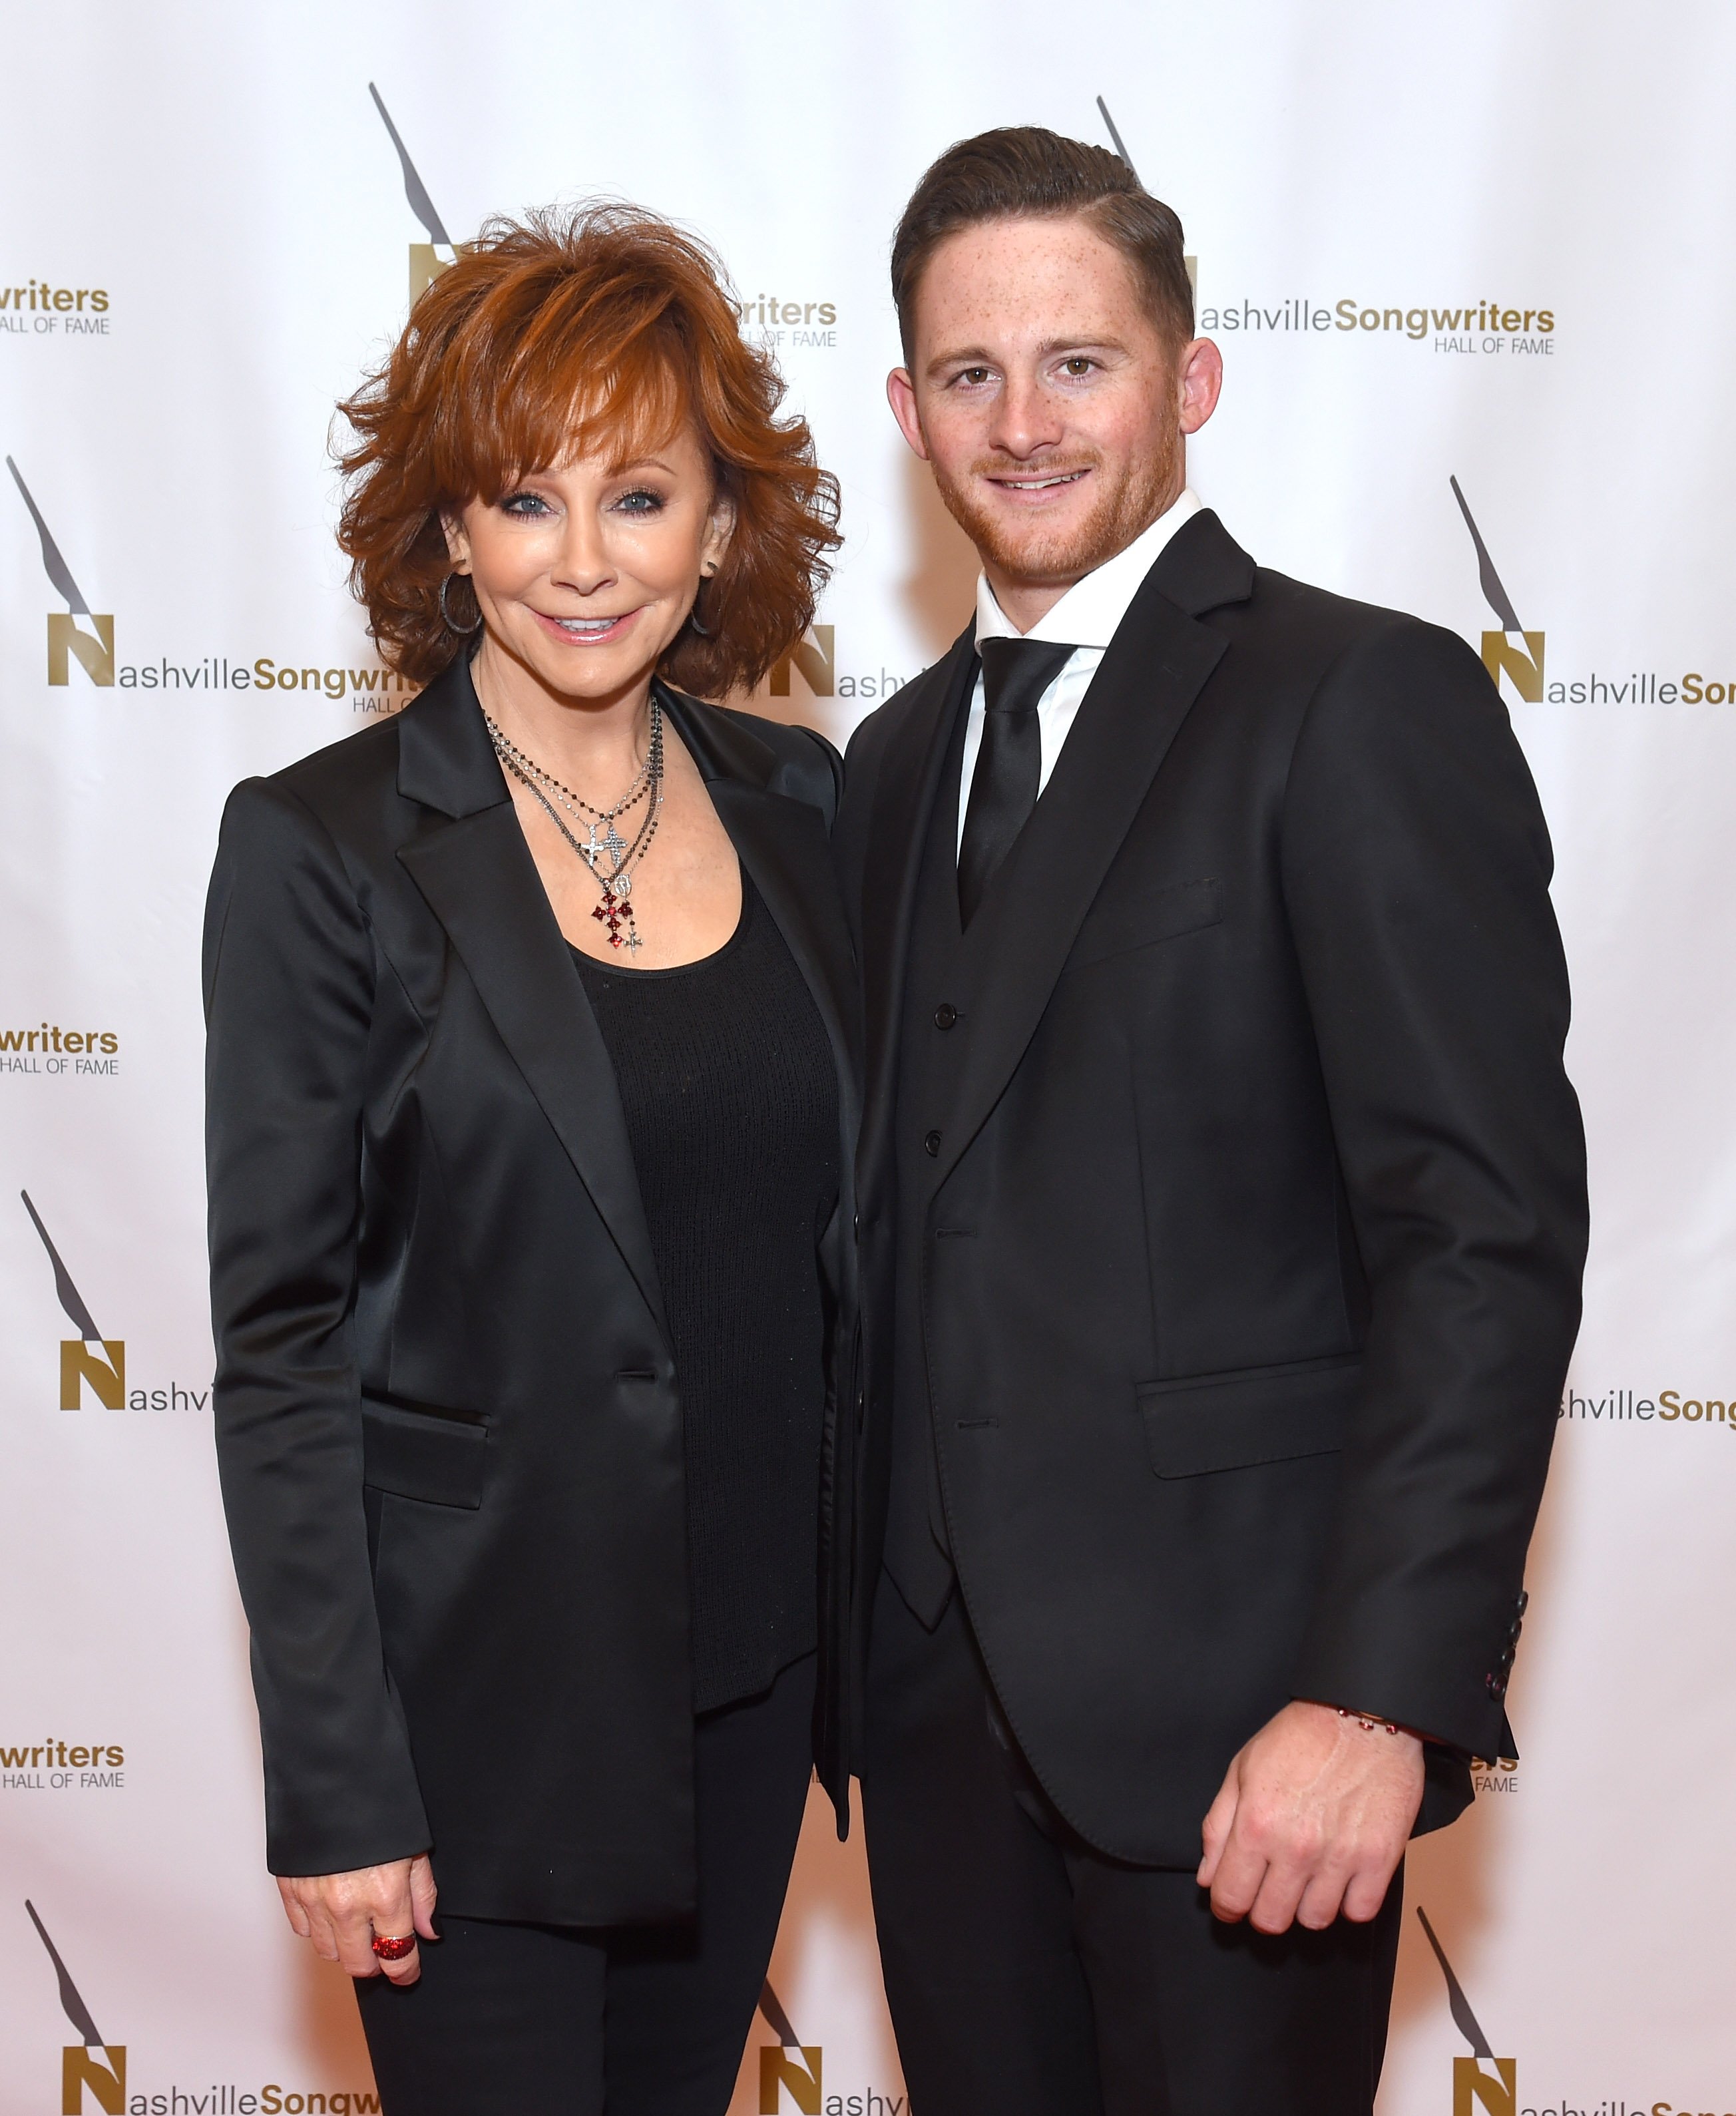 Reba McEntire and her son Shelby Blackstock attend the 2018 Nashville Songwriters Hall Of Fame Gala at Music City Center on October 28, 2018 | Photo: GettyImages